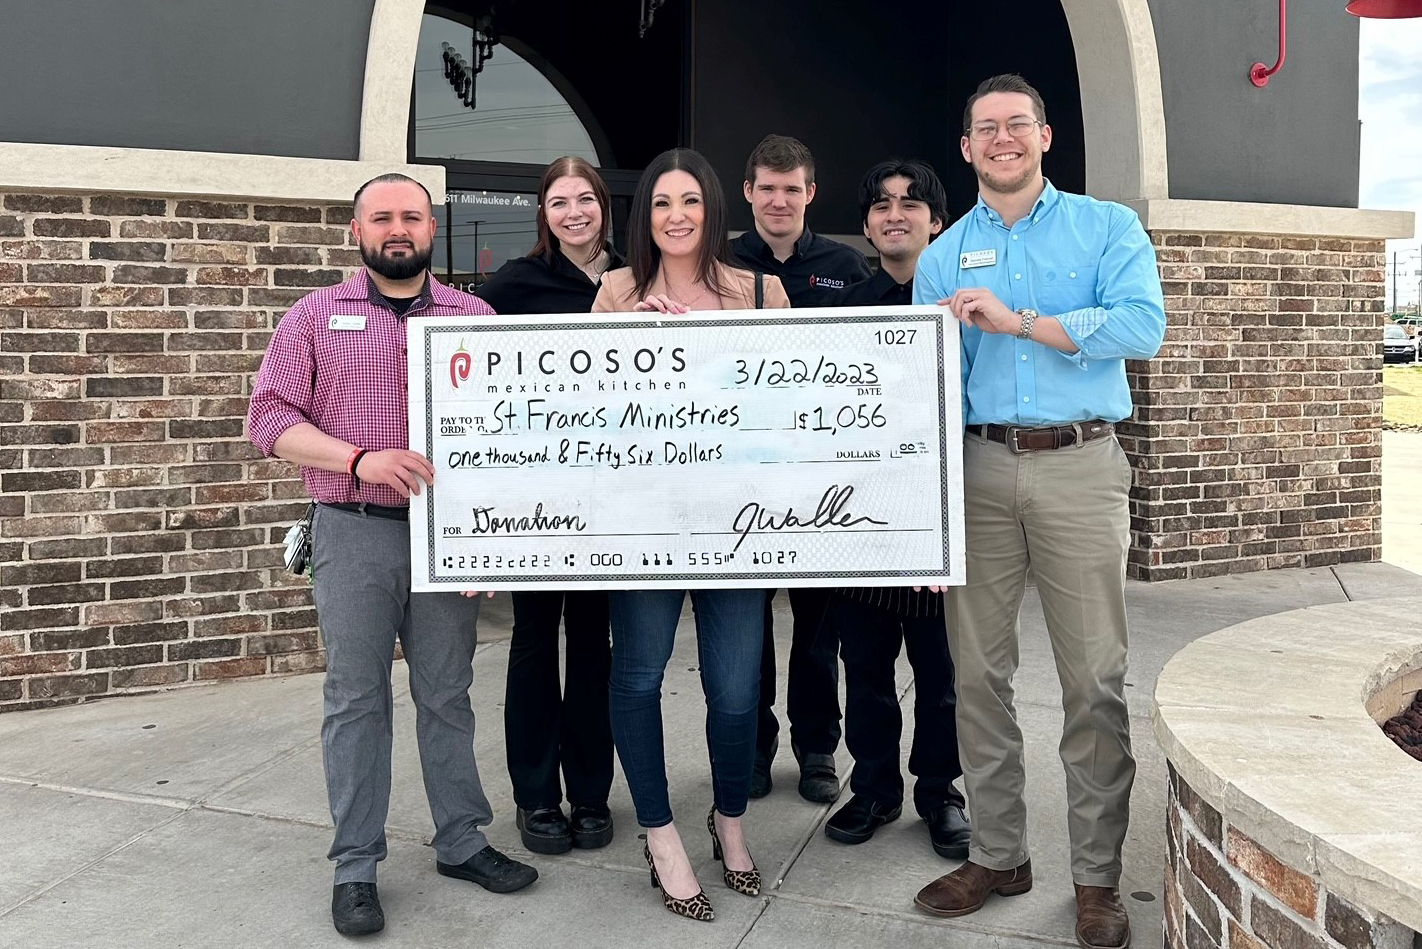 Picoso’s Mexican Kitchen selected Saint Francis Ministries as their monthly partner, raising $1056 through a specialty menu. This initiative reflects the impactful role of local businesses in supporting nonprofits, directly benefiting our programs and the communities we serve.